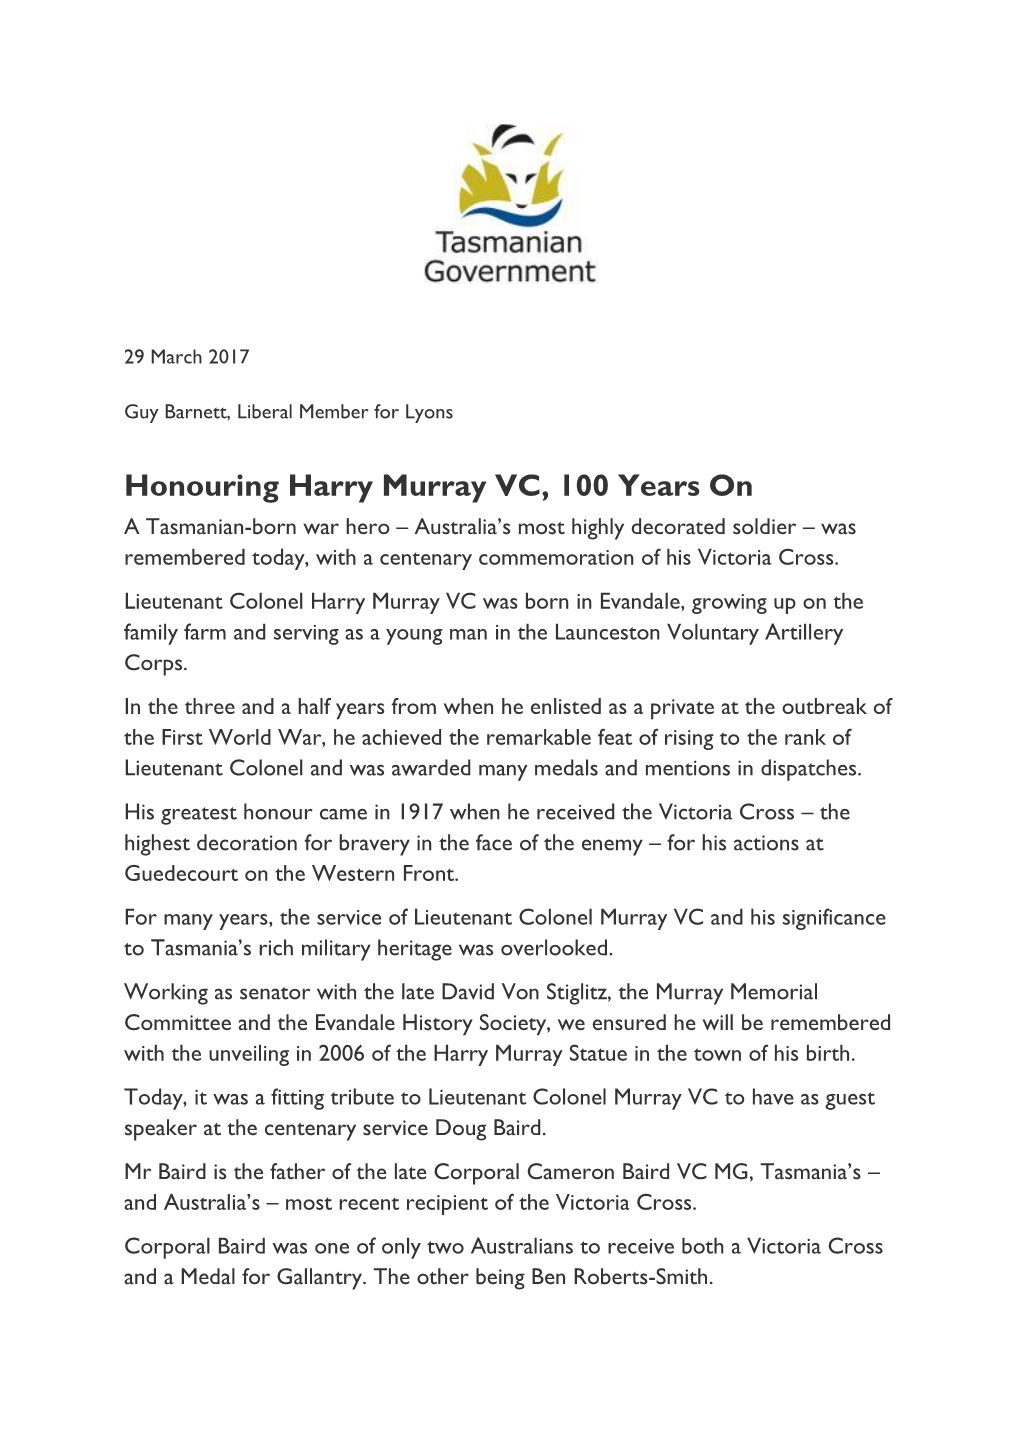 Honouring Harry Murray VC, 100 Years On